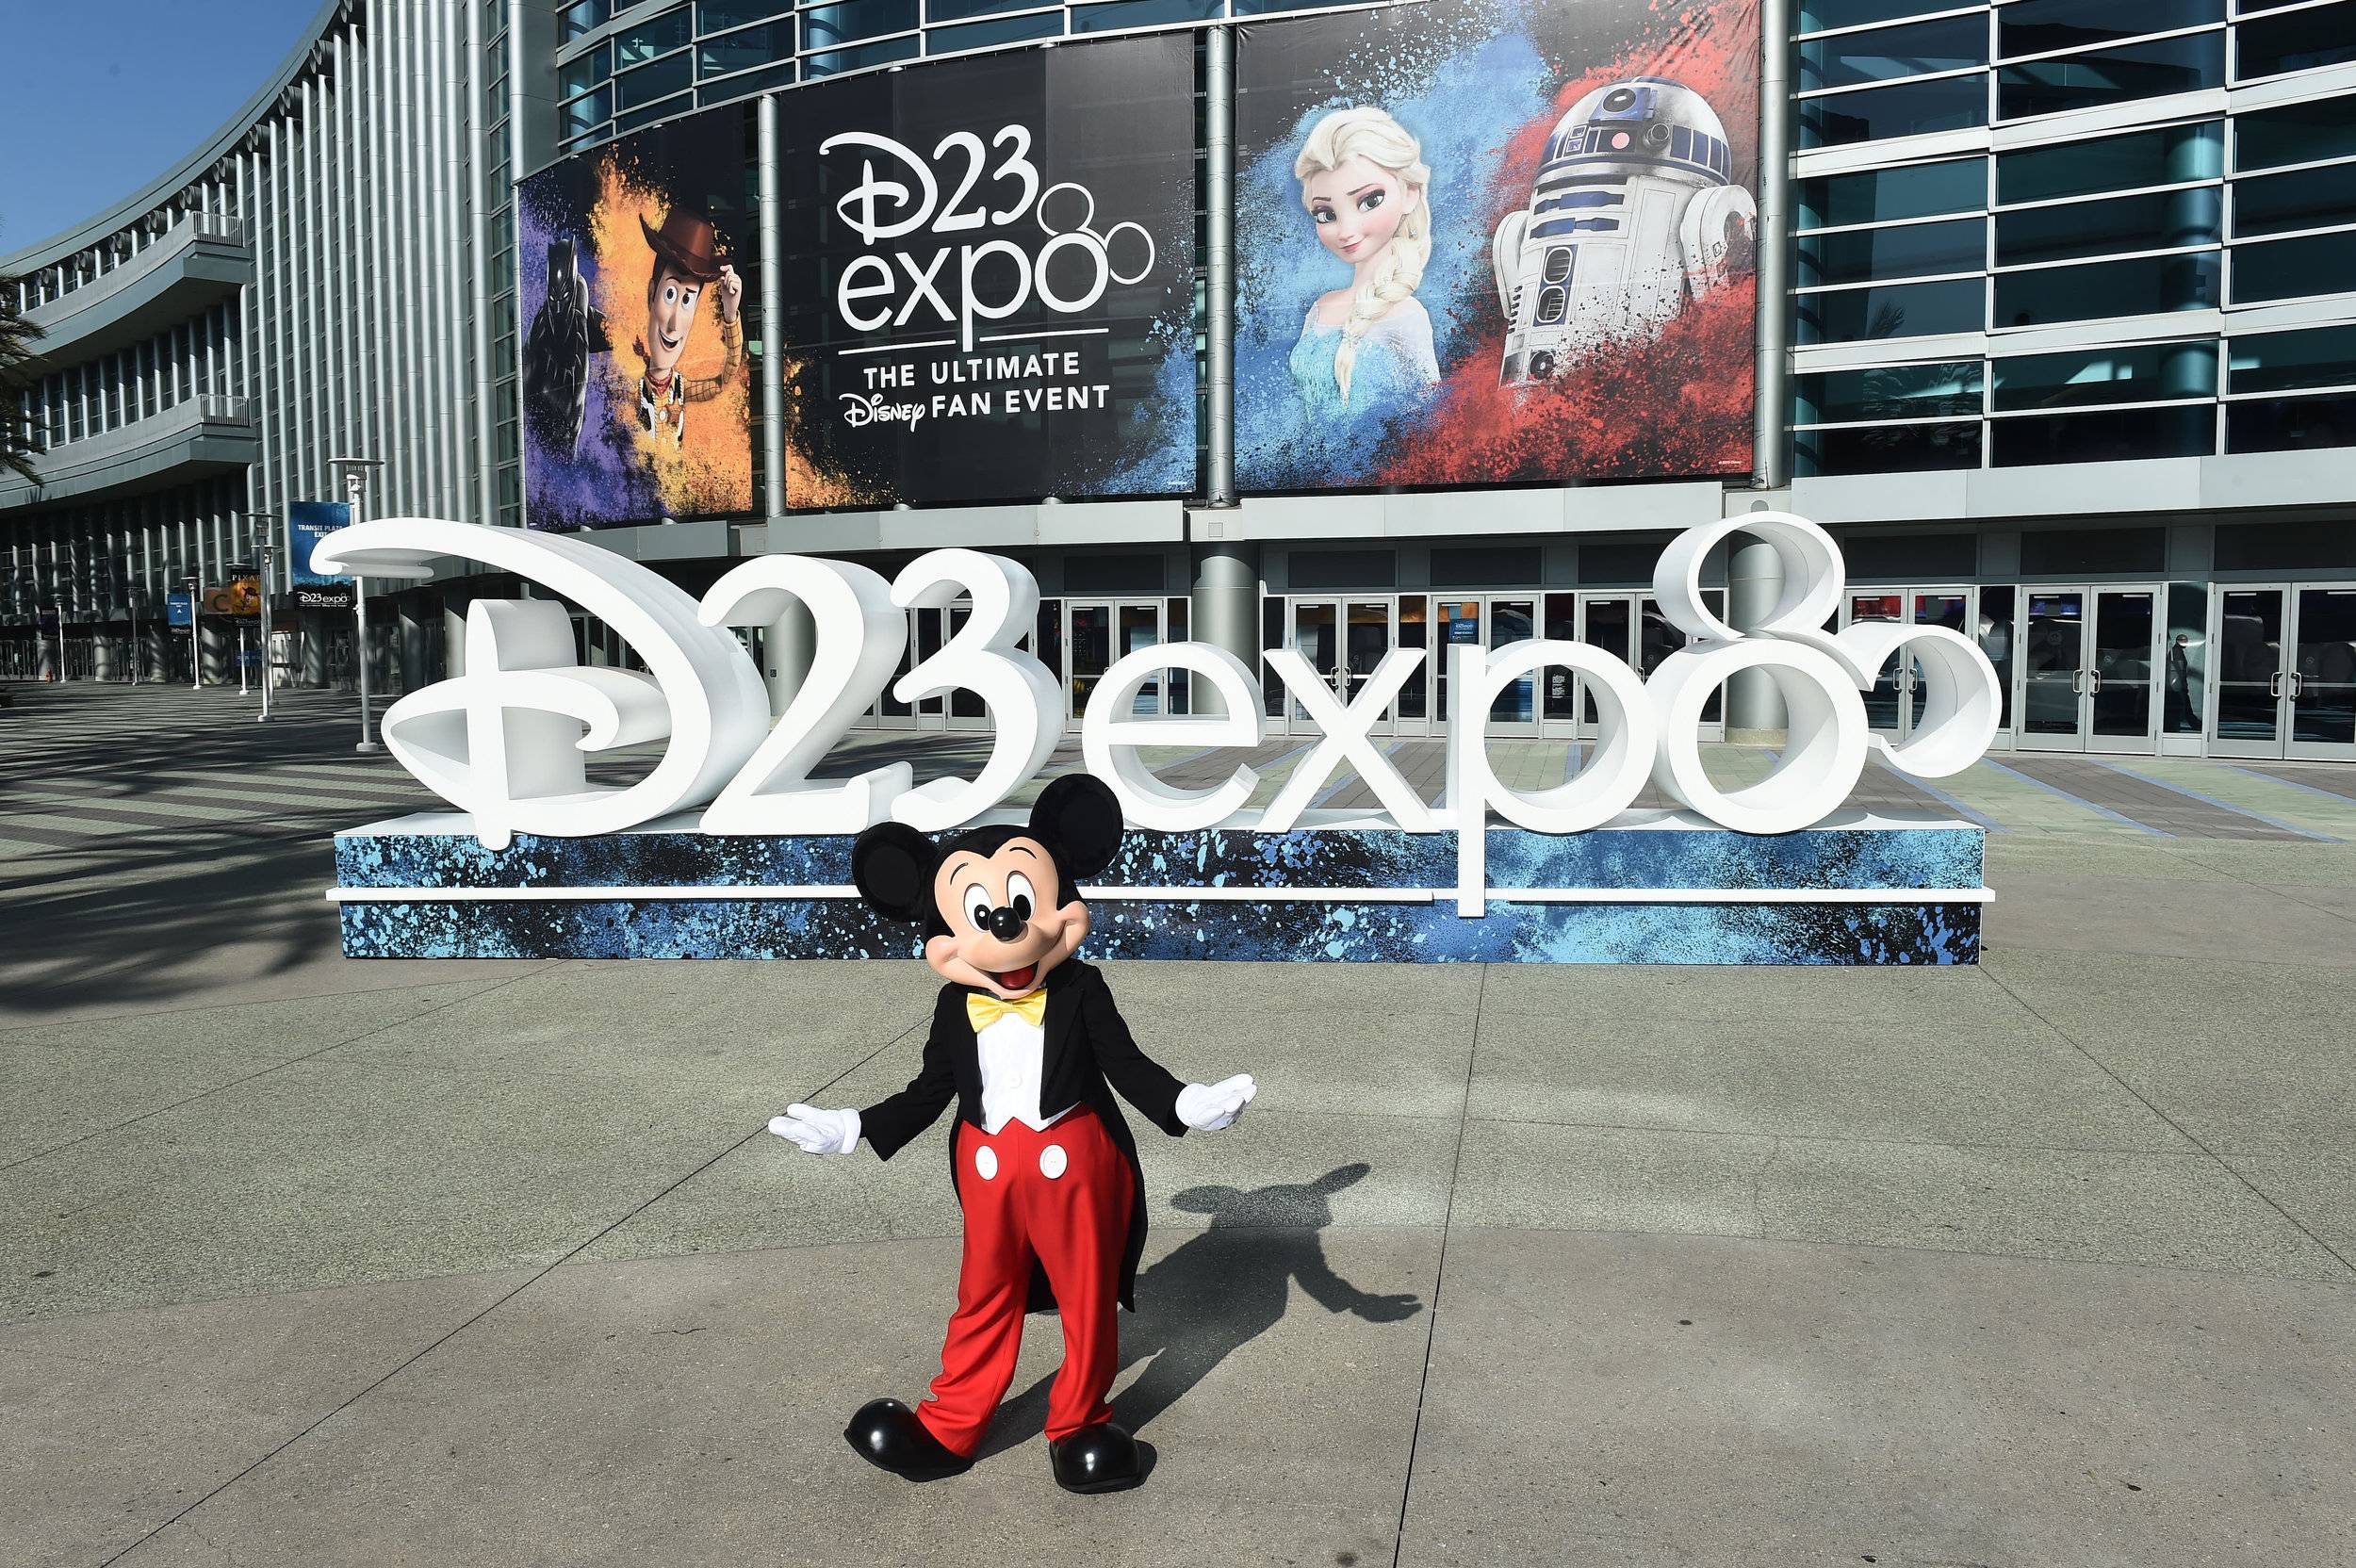 D23 Expo 2019 ticket pricing and availability announced